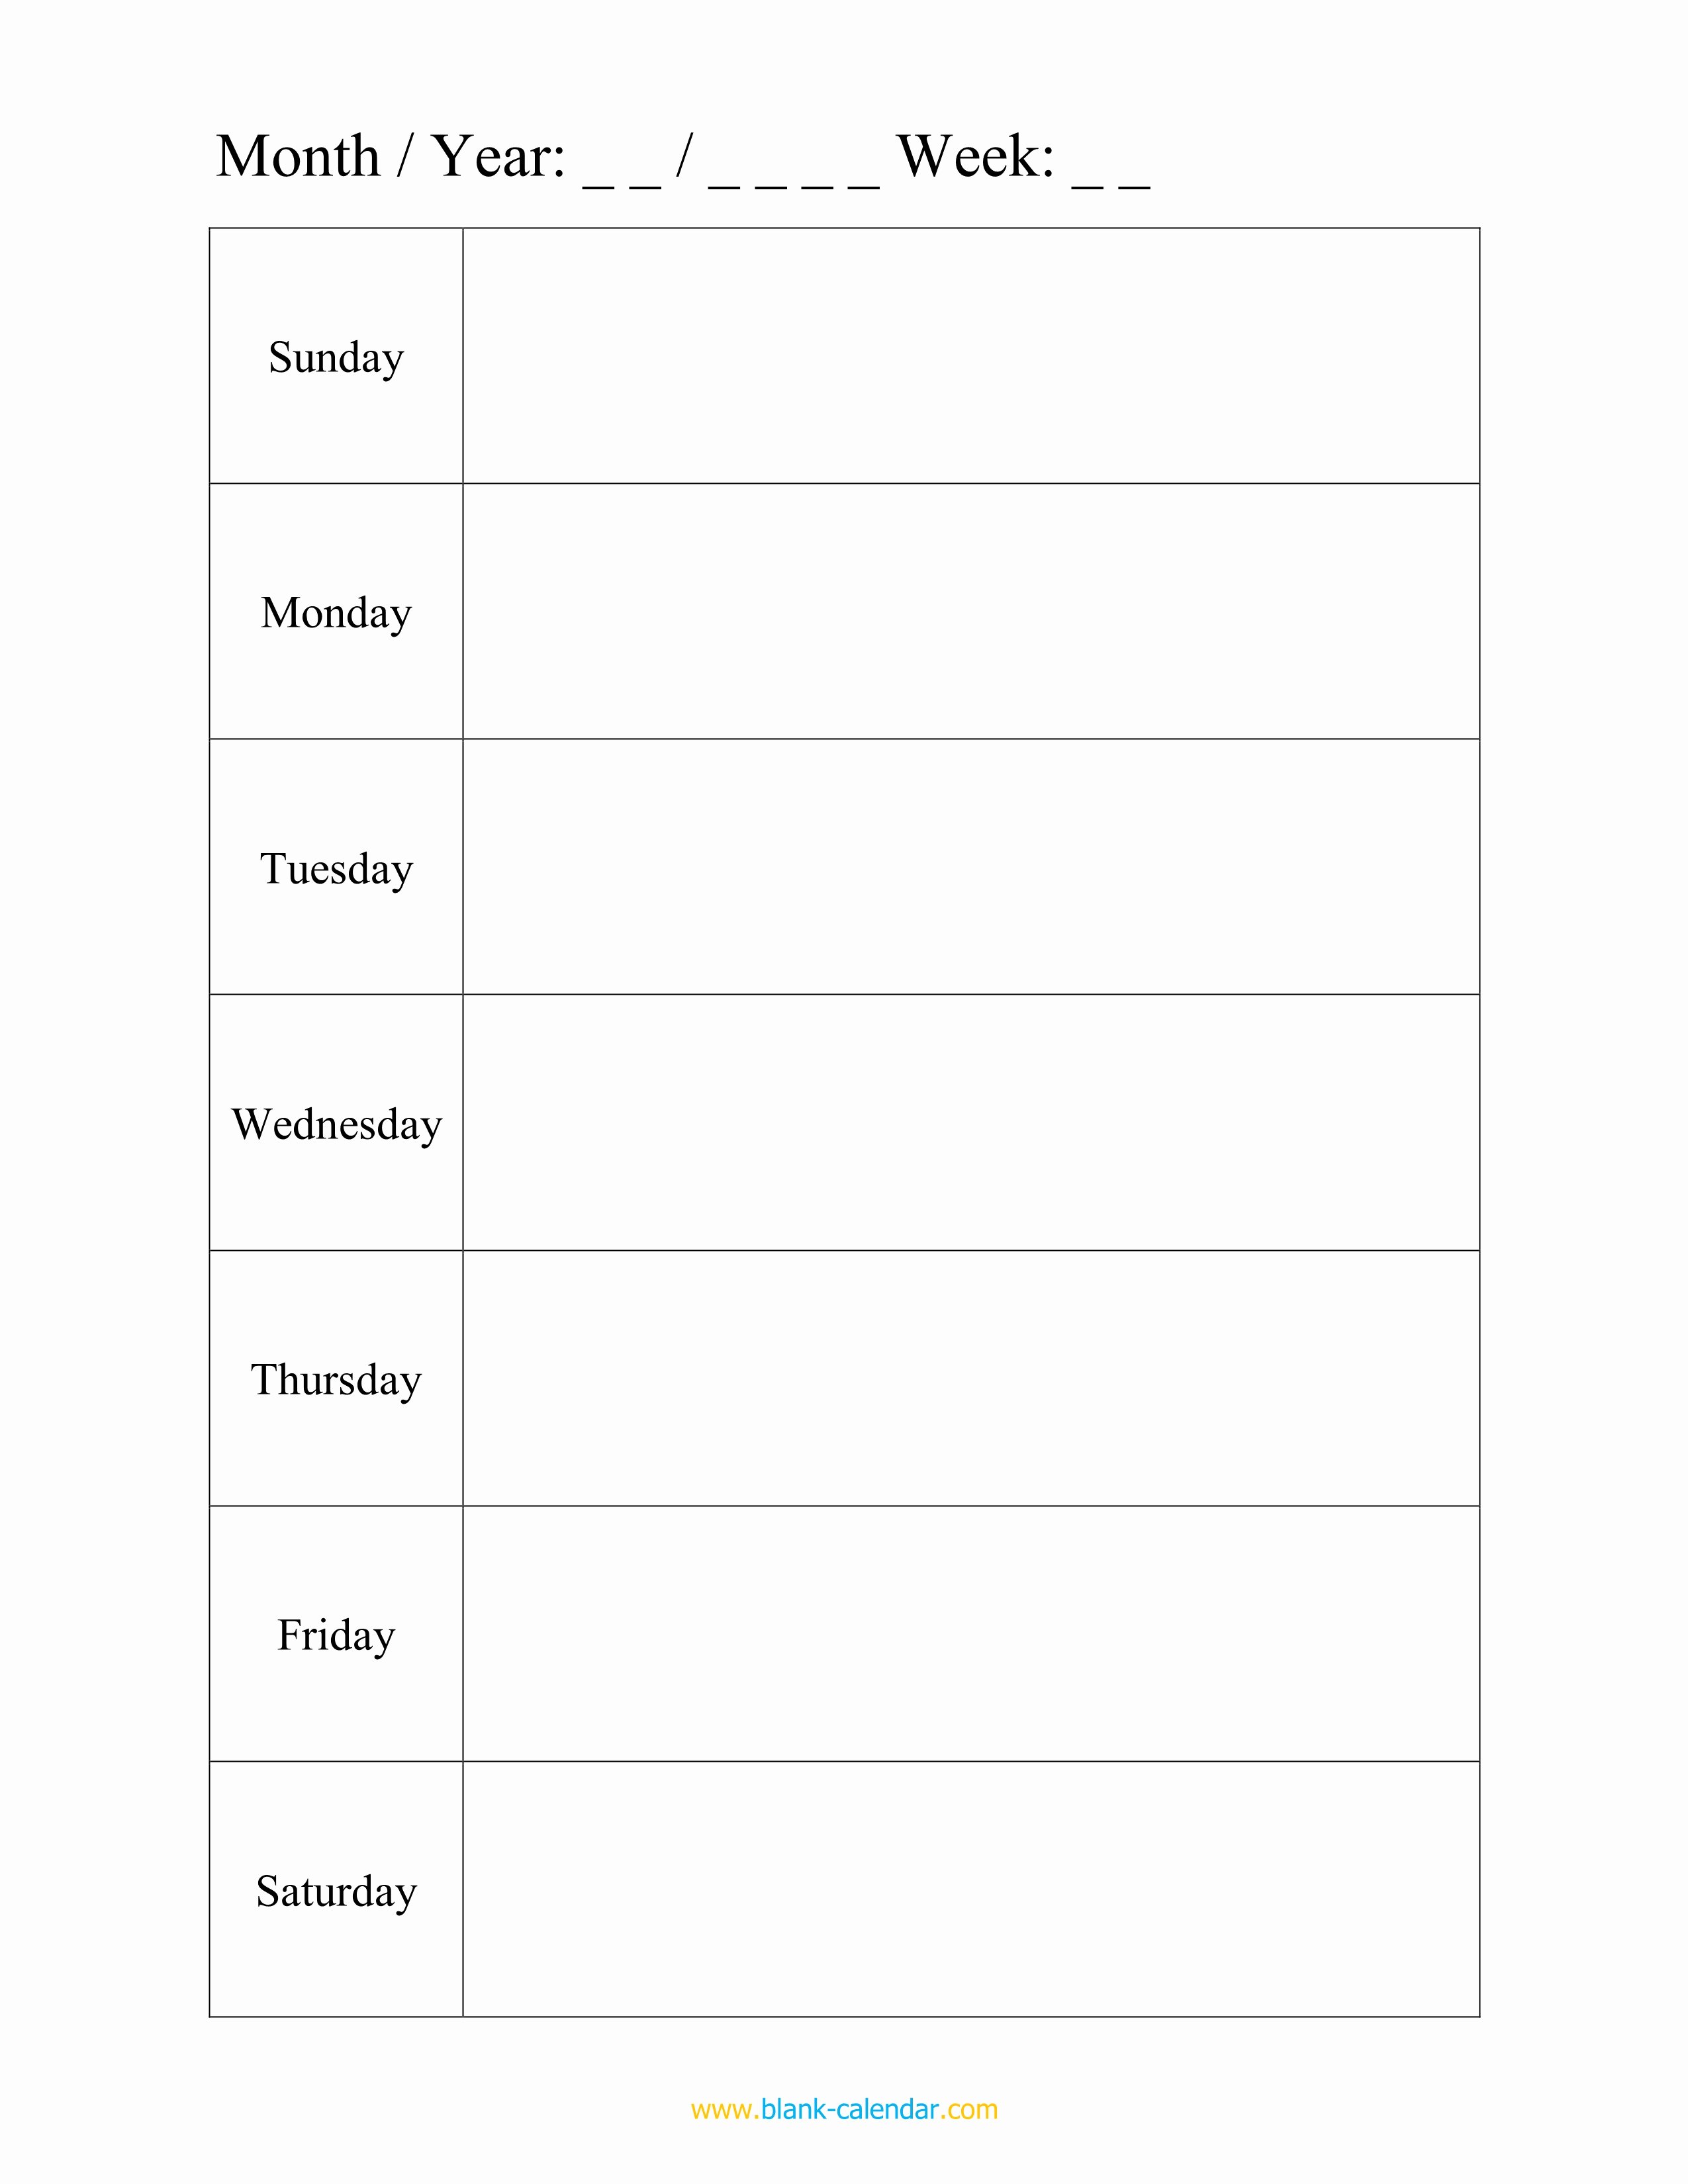 Weekly Planner Template Pdf Unique Weekly Schedule Planner Templates Word Excel Pdf